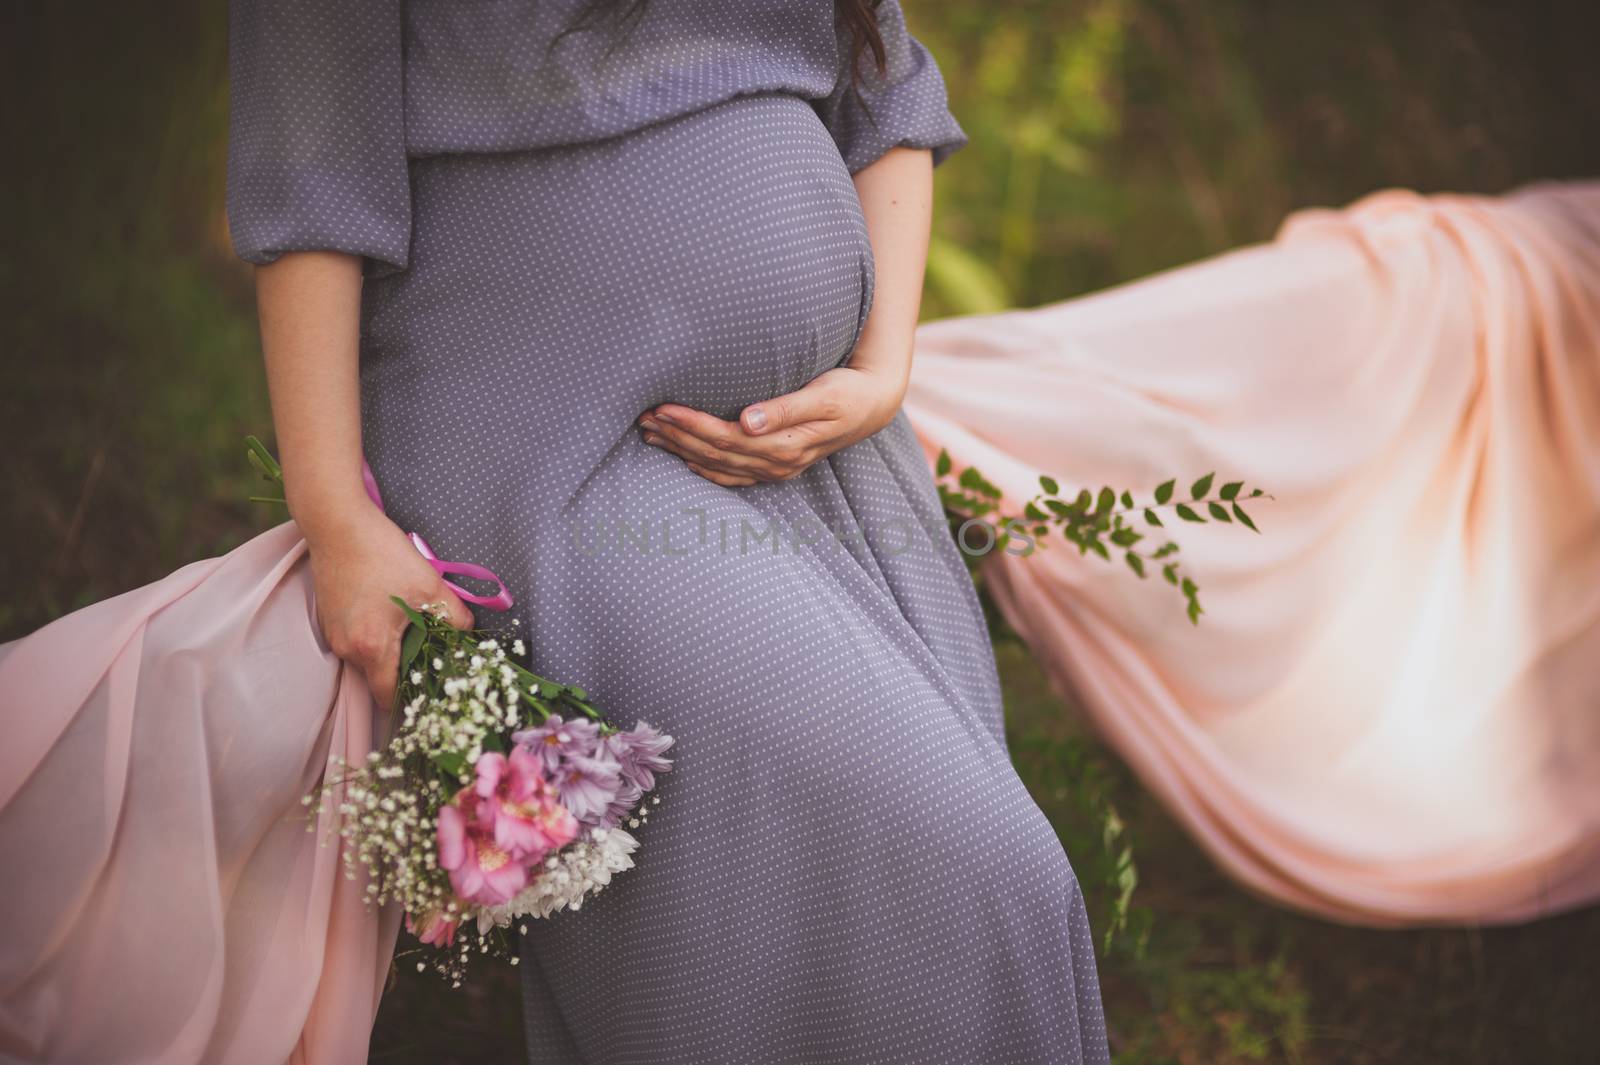 women holds hands on her belly while being pregnant  by fesenko